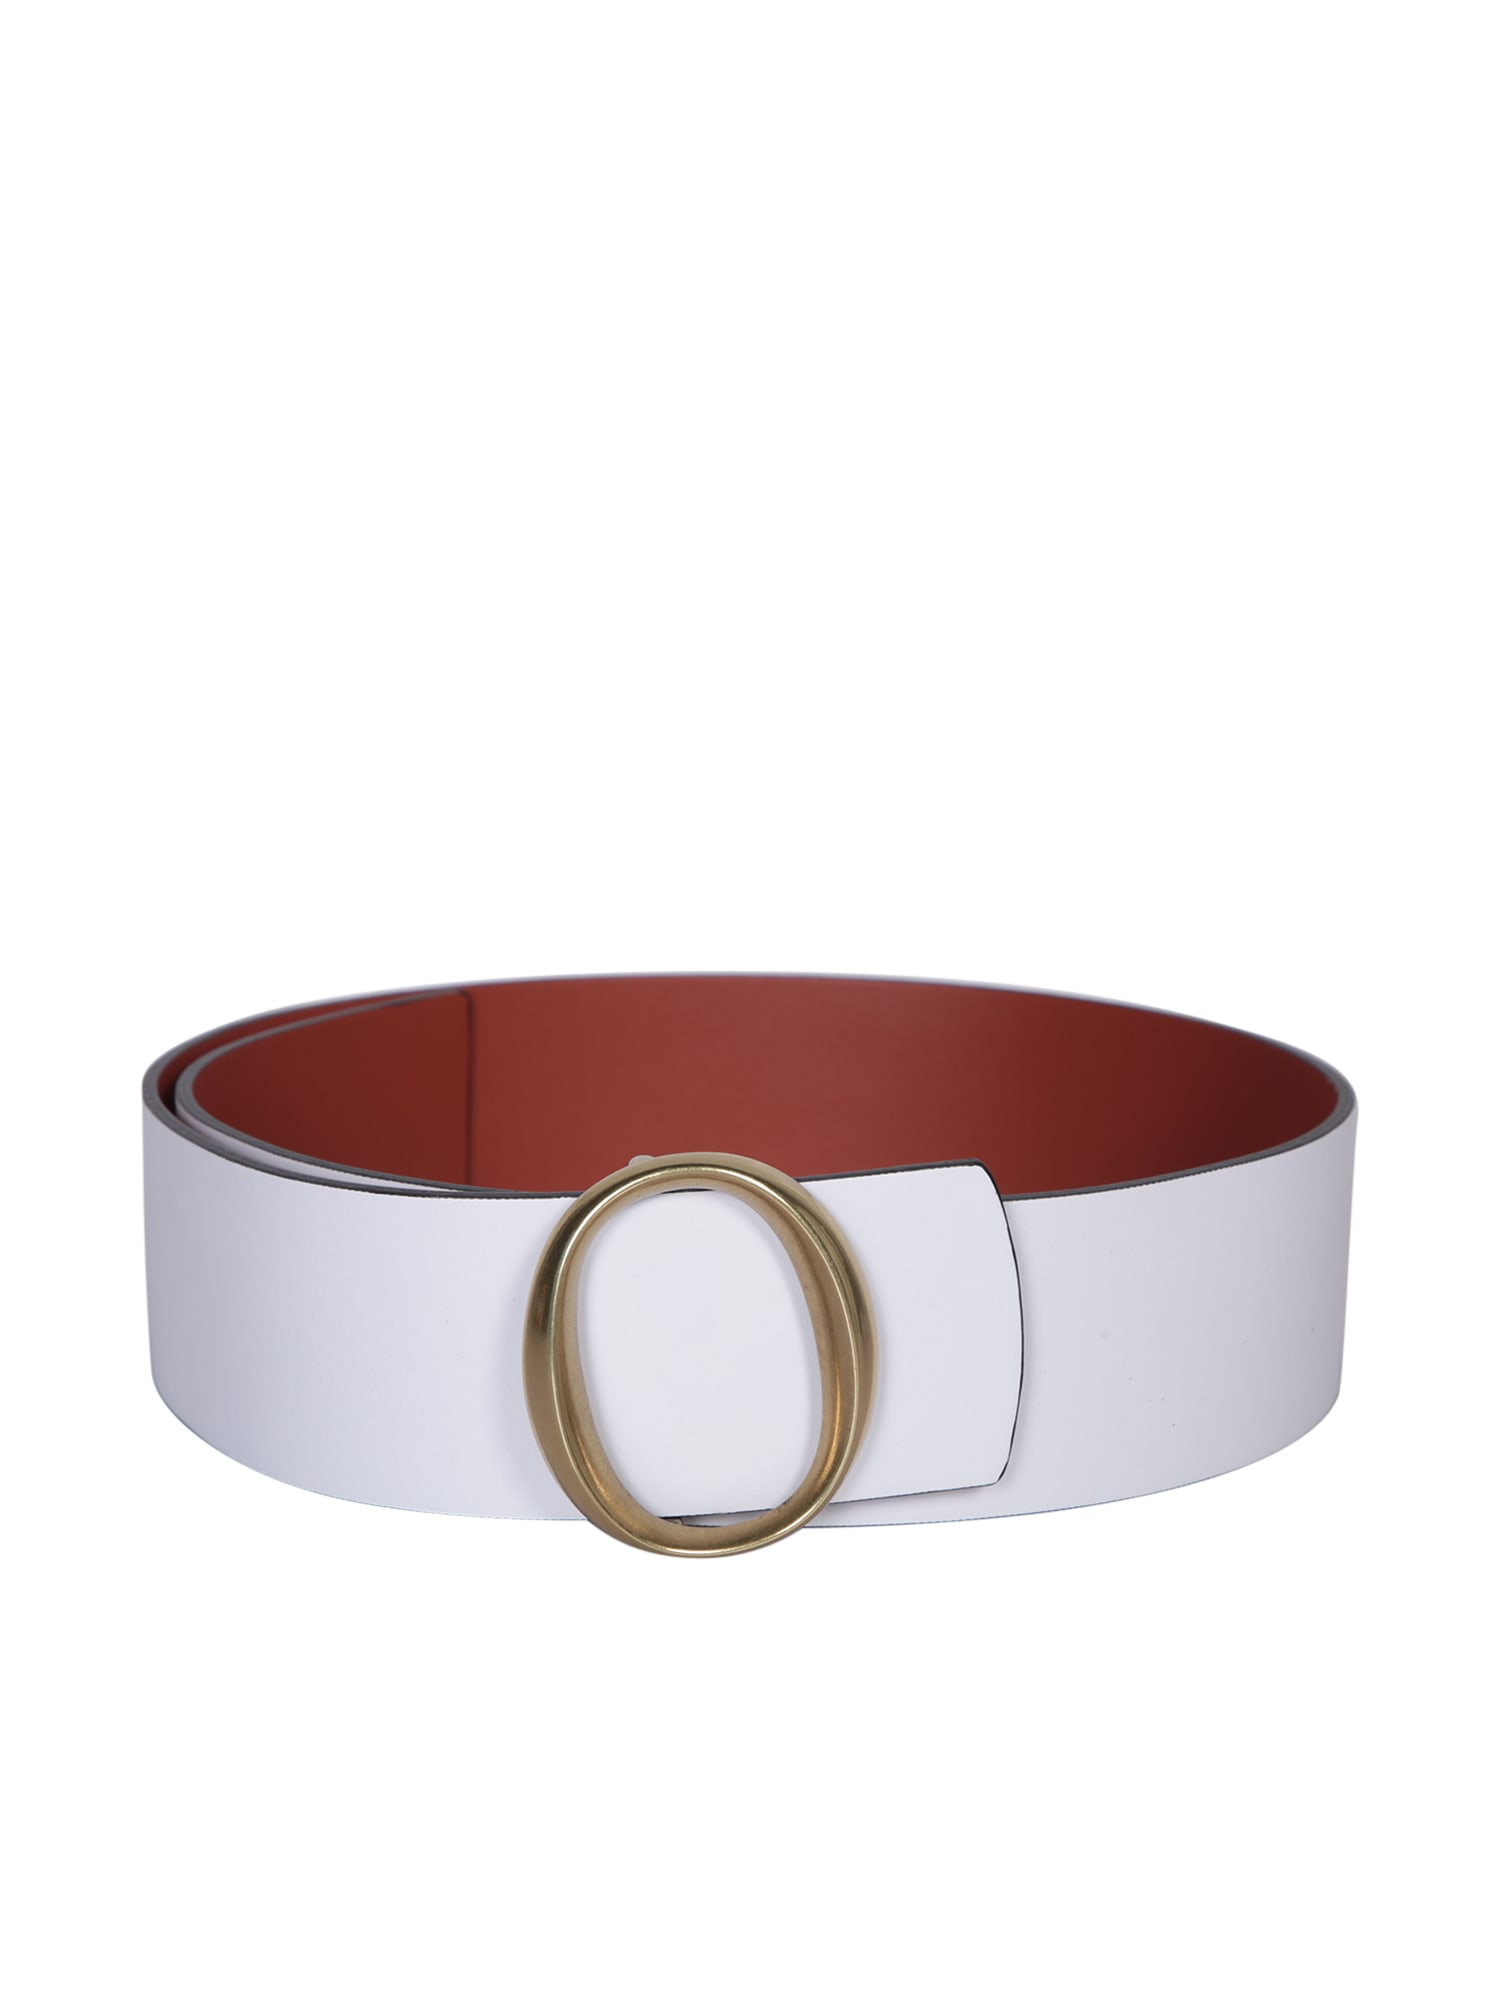 Shop Orciani Soft Double Brown/white Belt